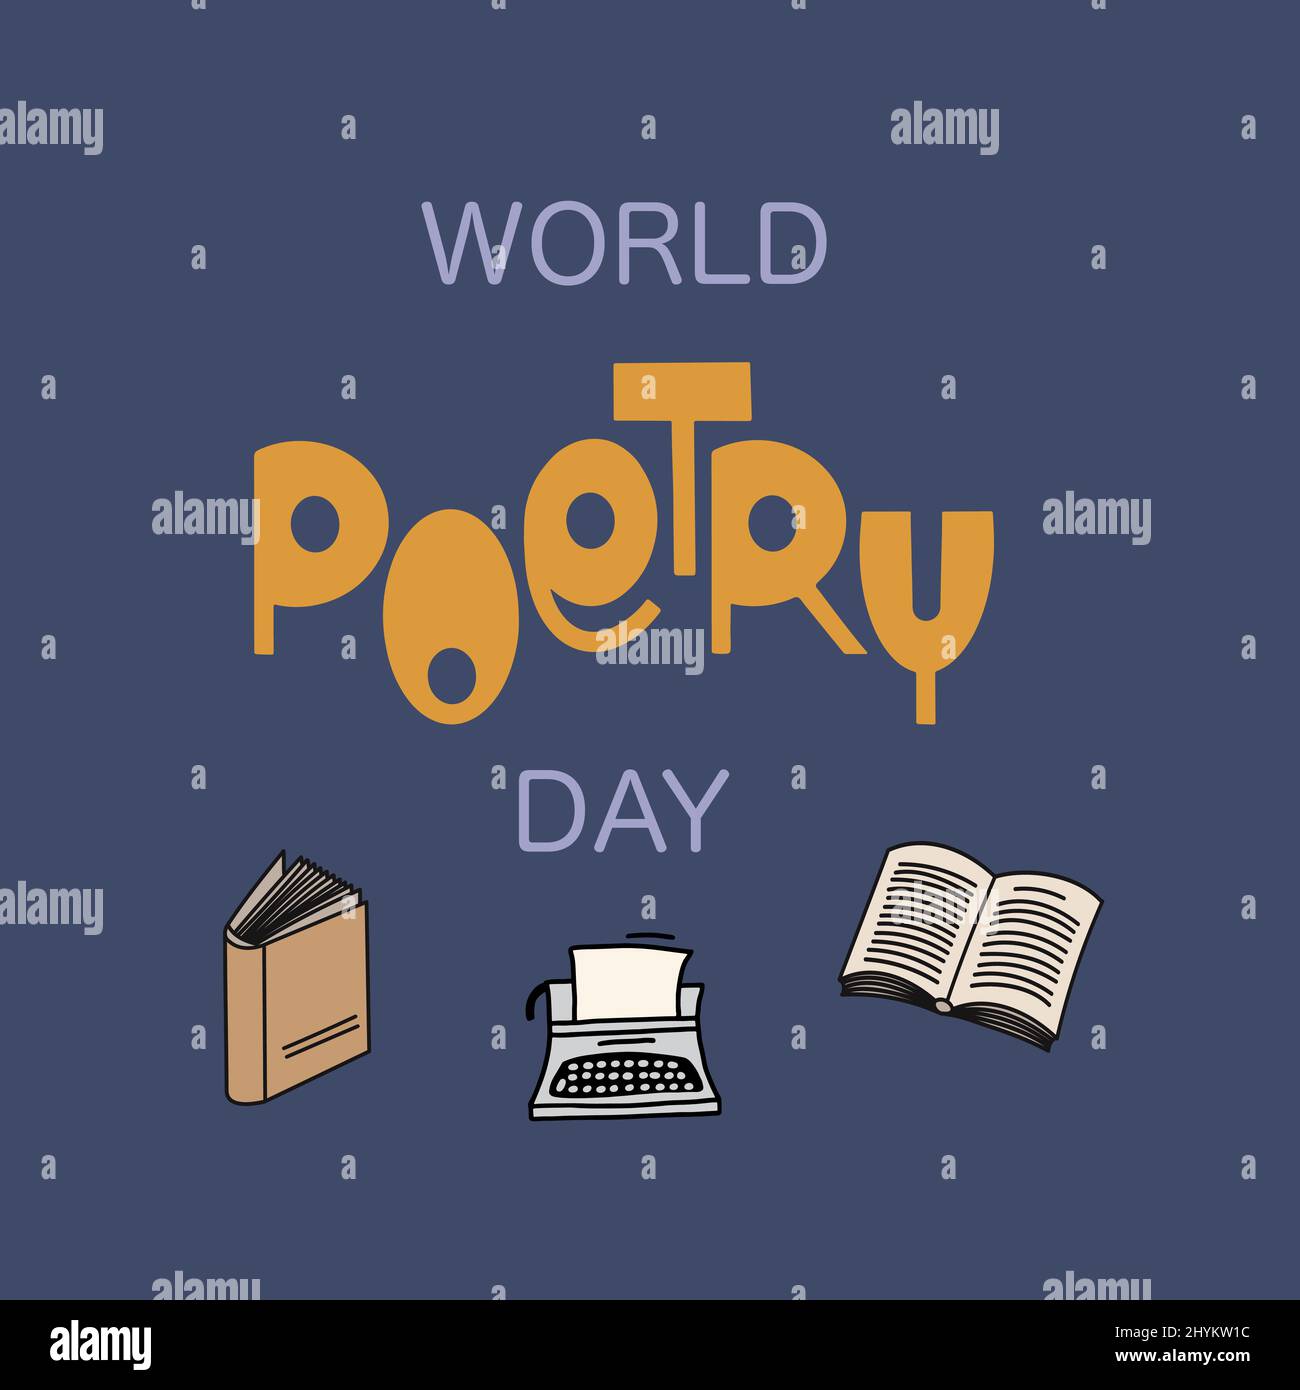 World poetry day design. Poetry lettering with doodle style illustrations. Stock Vector